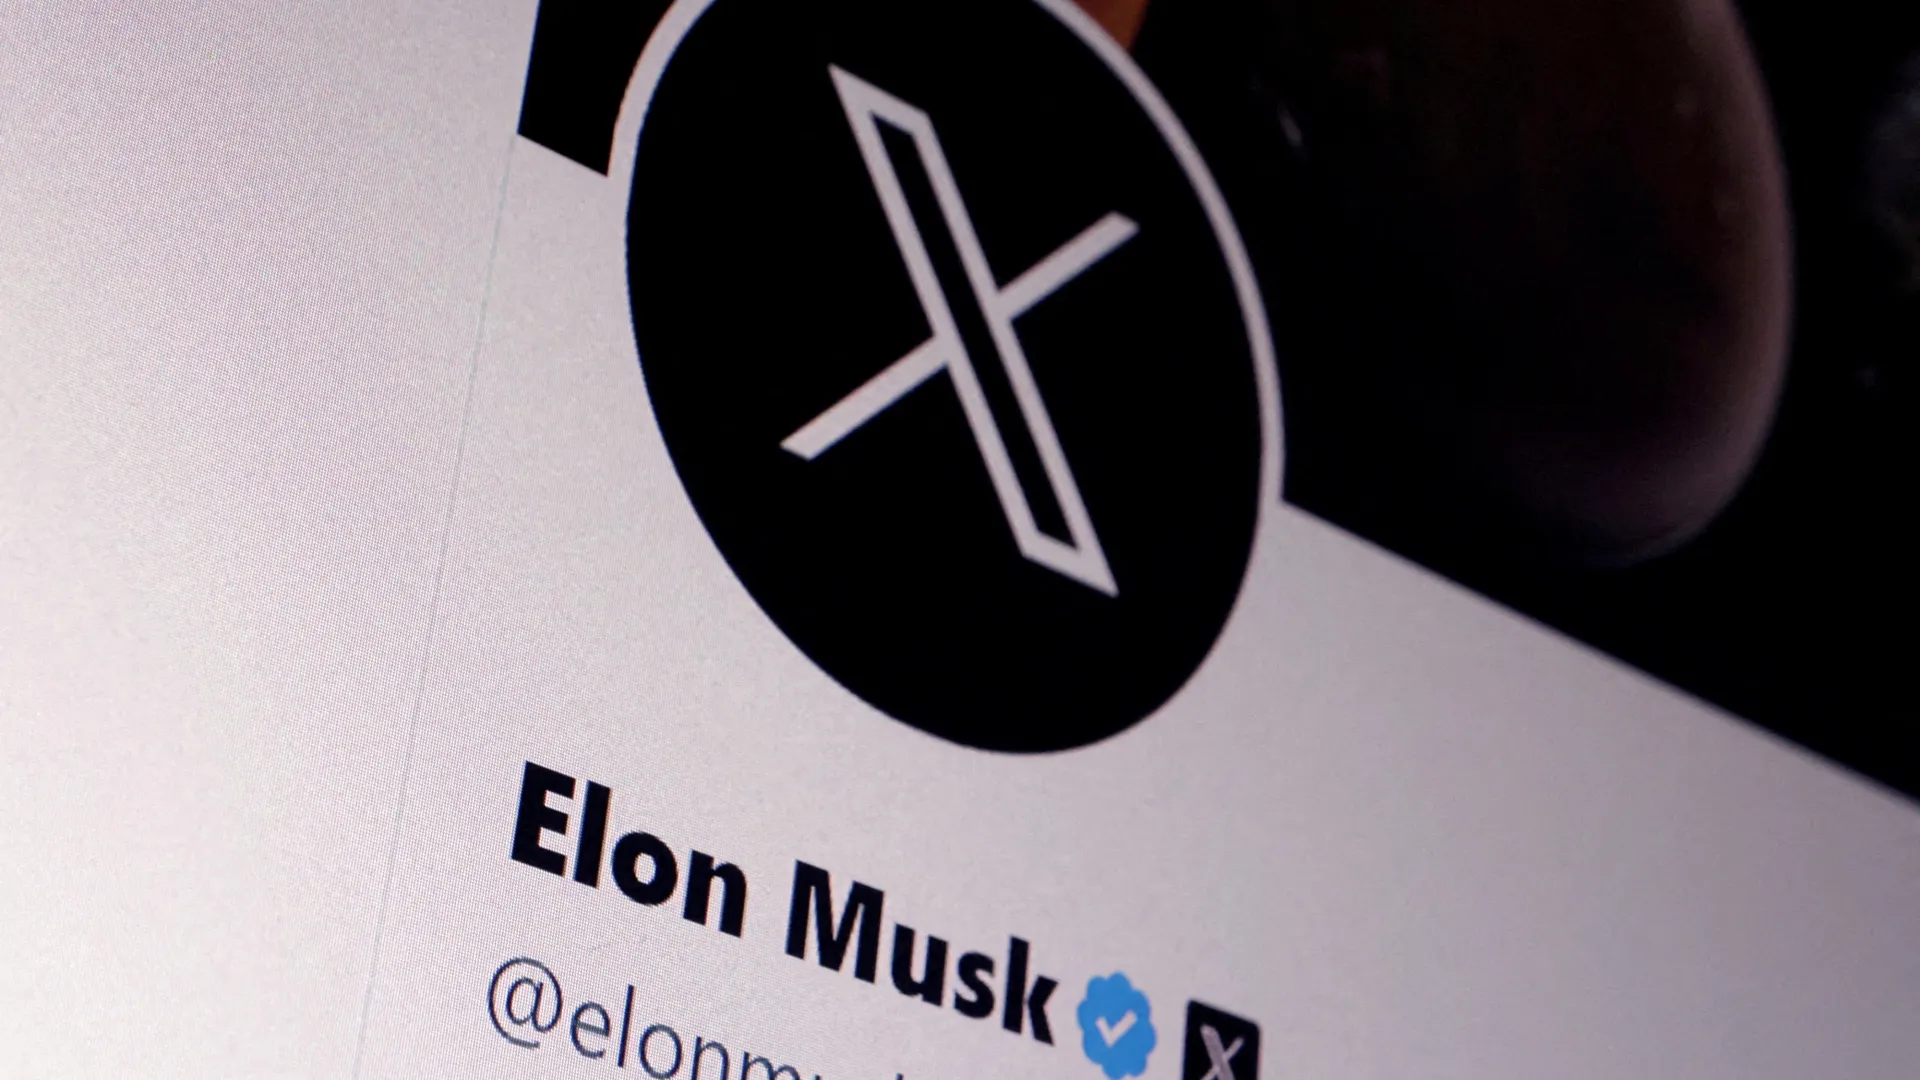 Elon Musk Is Facing Backlash From Australia for Graphic Videos of Violence on X, Stated As the “Arrogant Billionaire.”